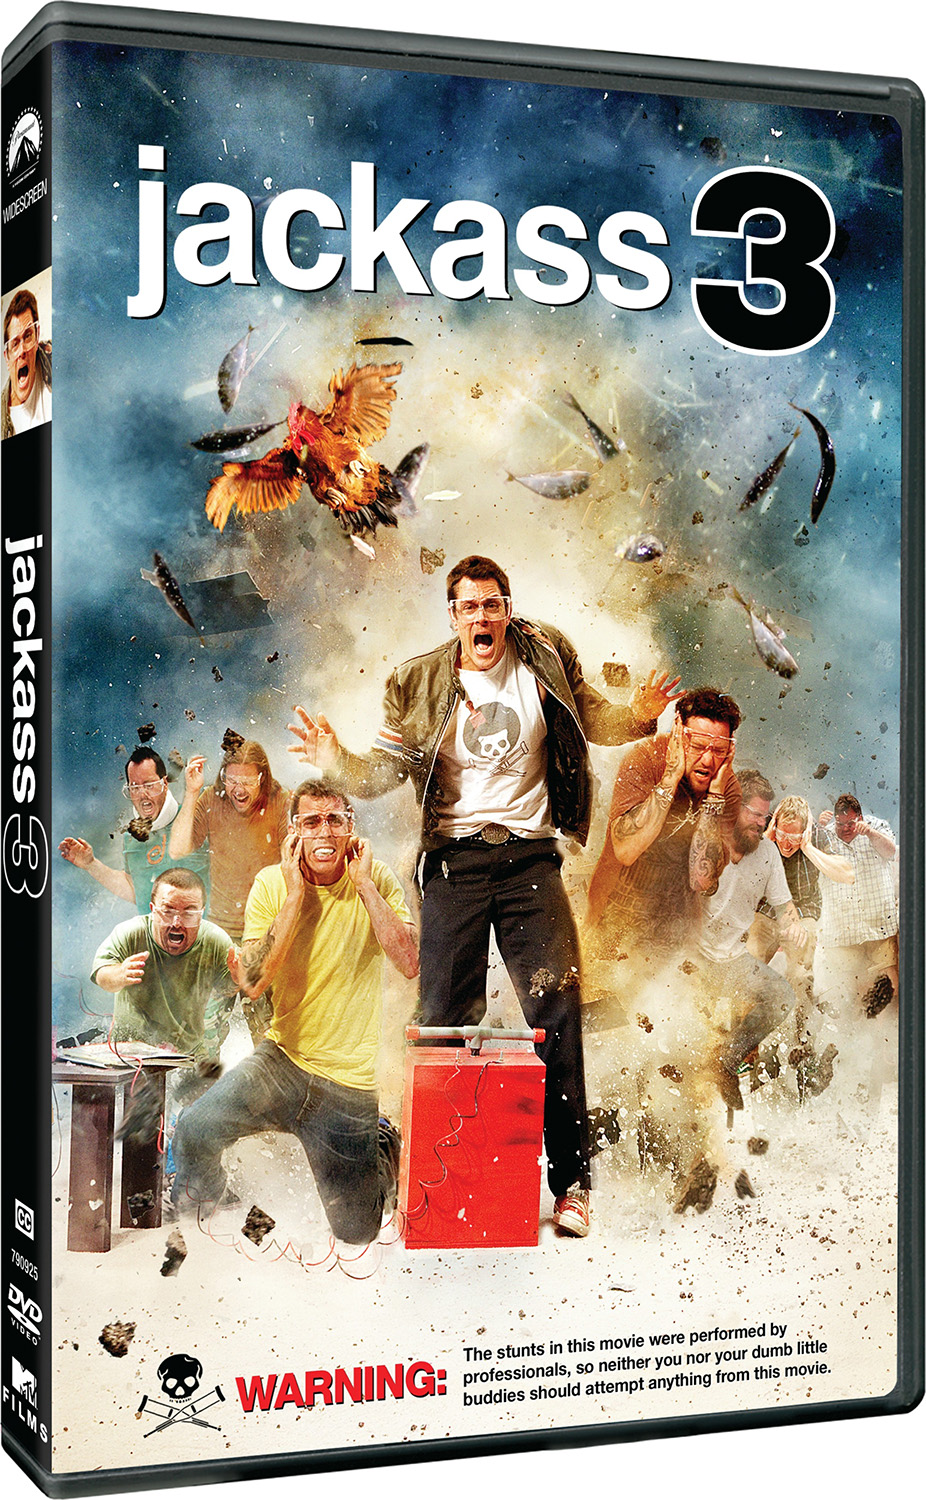 JACKASS 3 (RATED) (UNRATED) / (AC3 DOL DUB SUB WS)